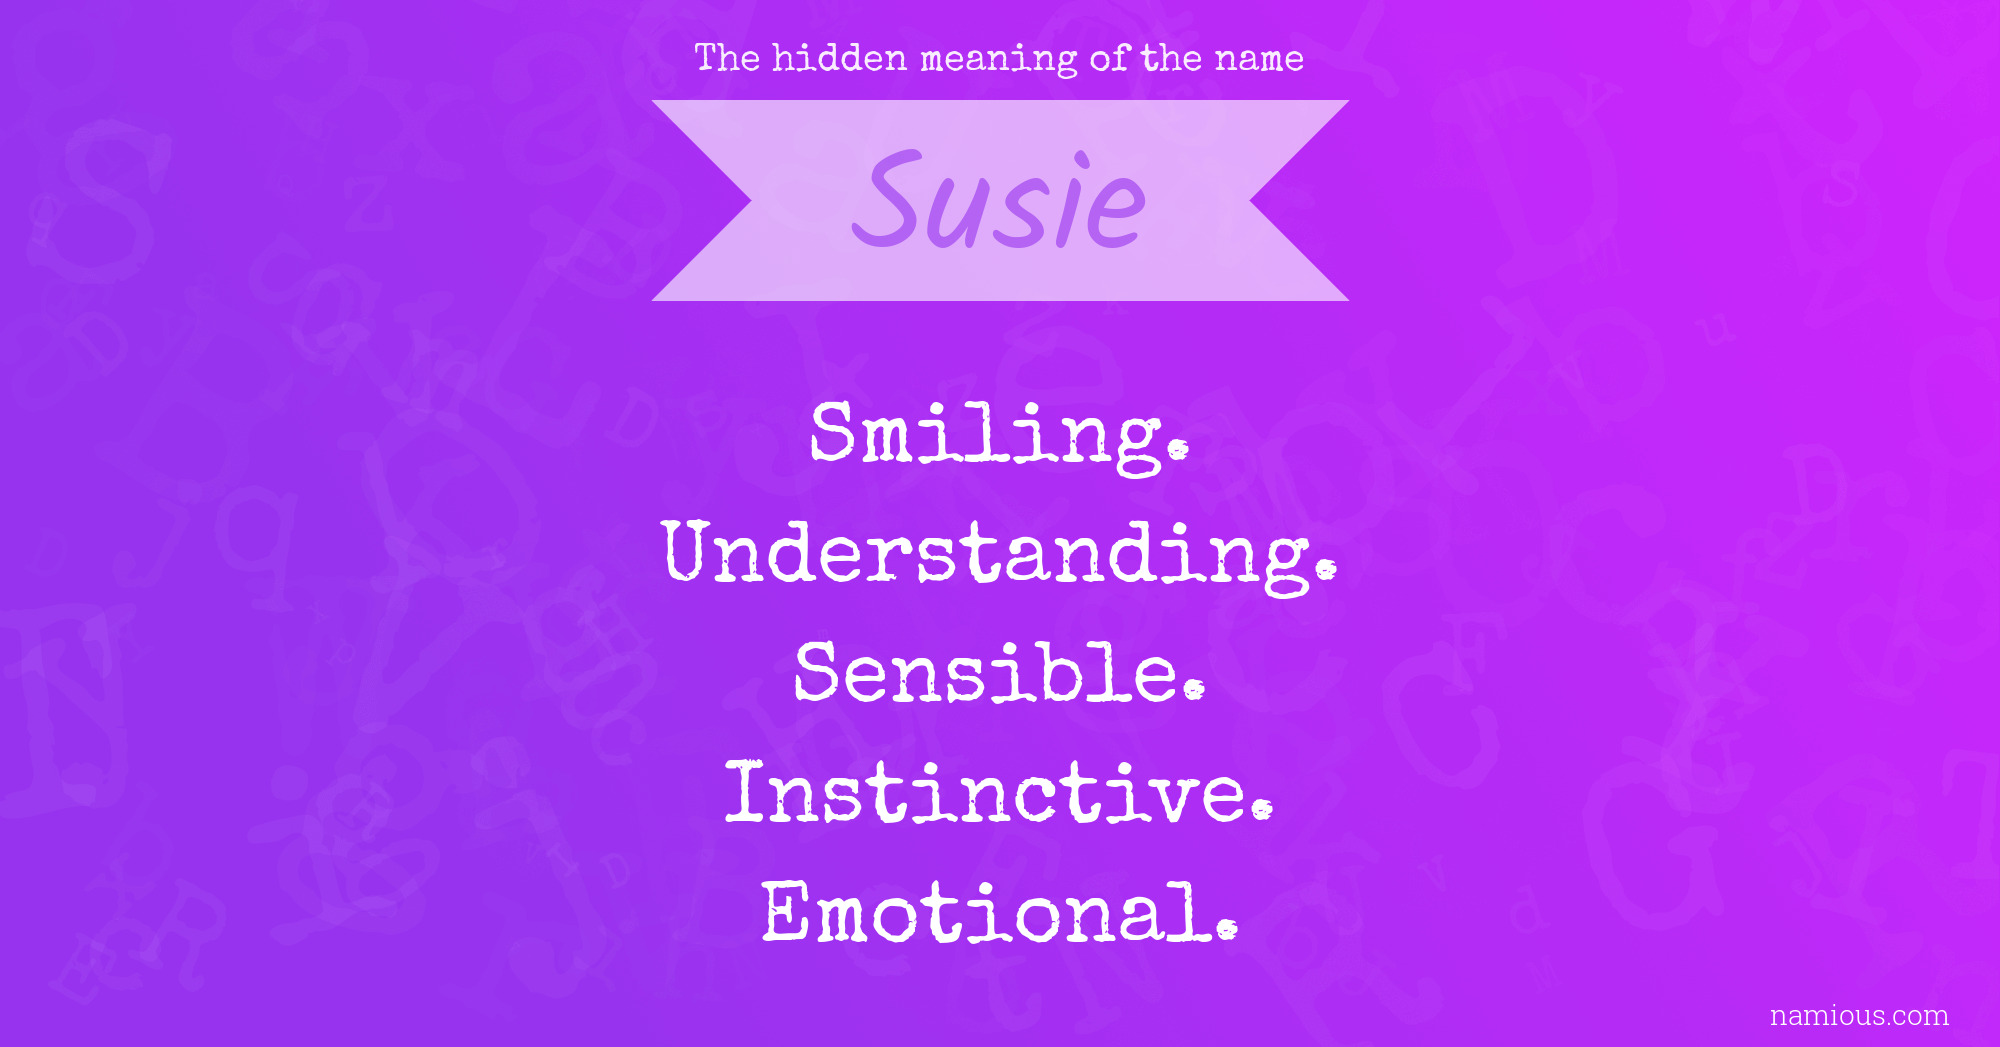 The hidden meaning of the name Susie